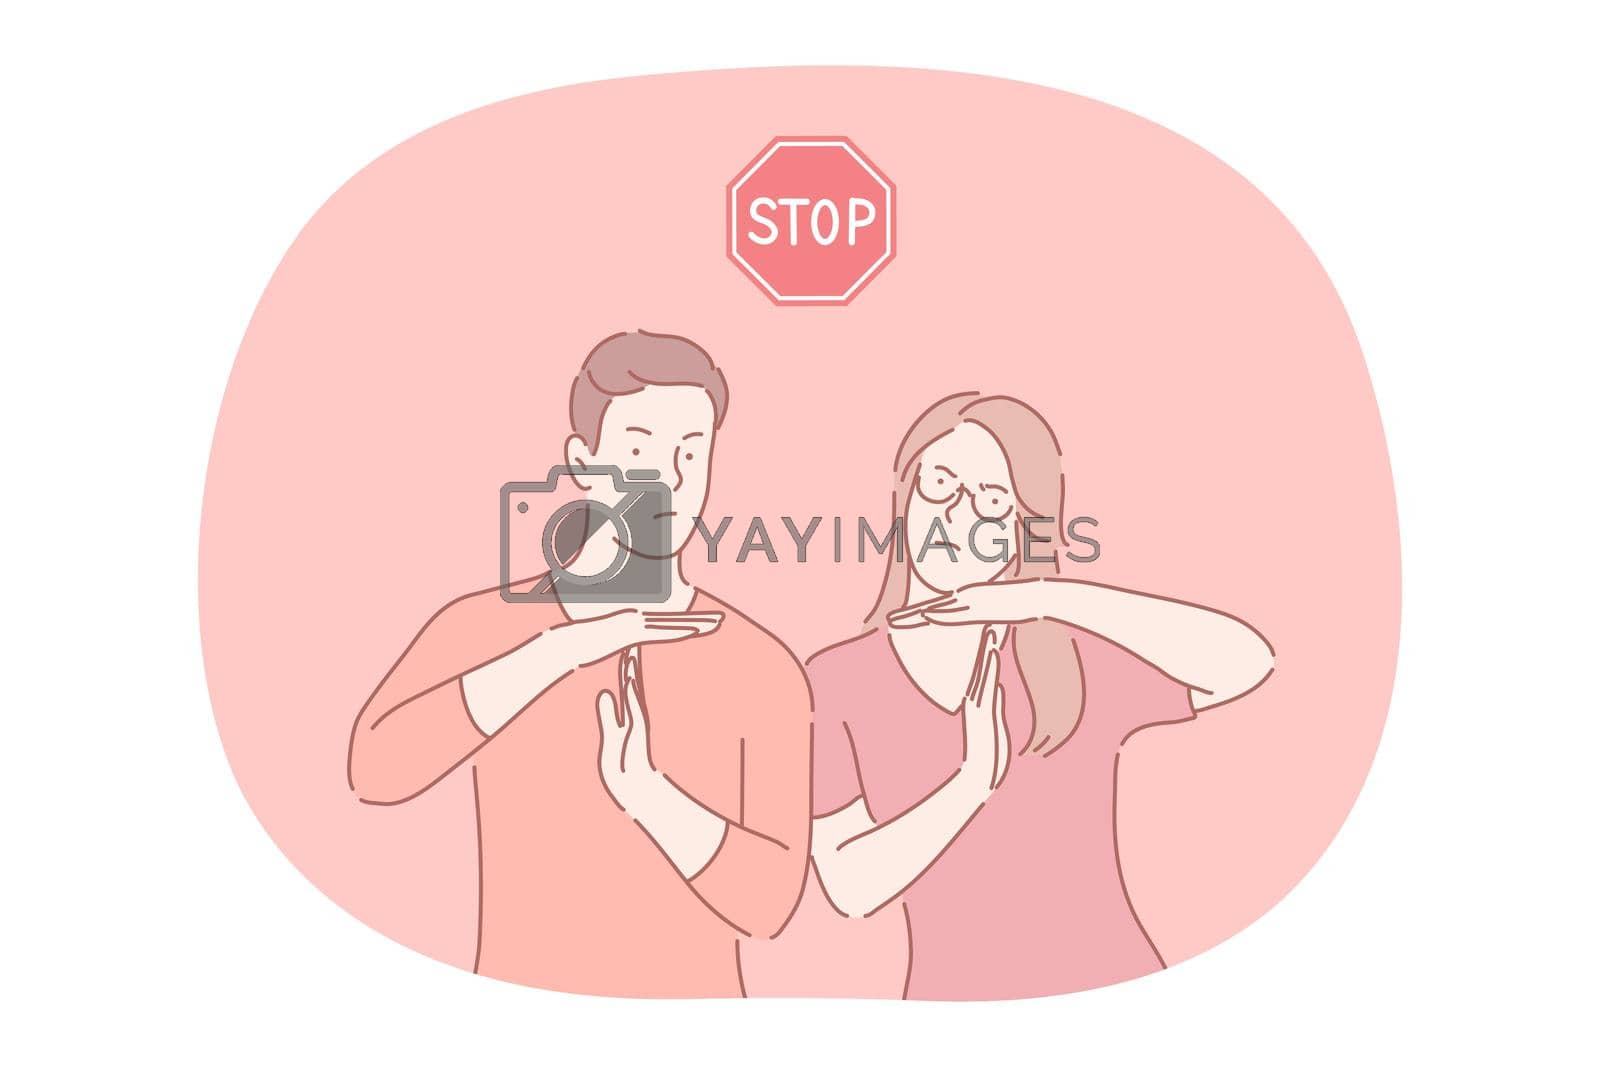 Stop, prohibiting gesture and sign concept. Young serious couple cartoon characters showing stop prohibiting interruption gesture with hands and red stop road sign above vector illustration